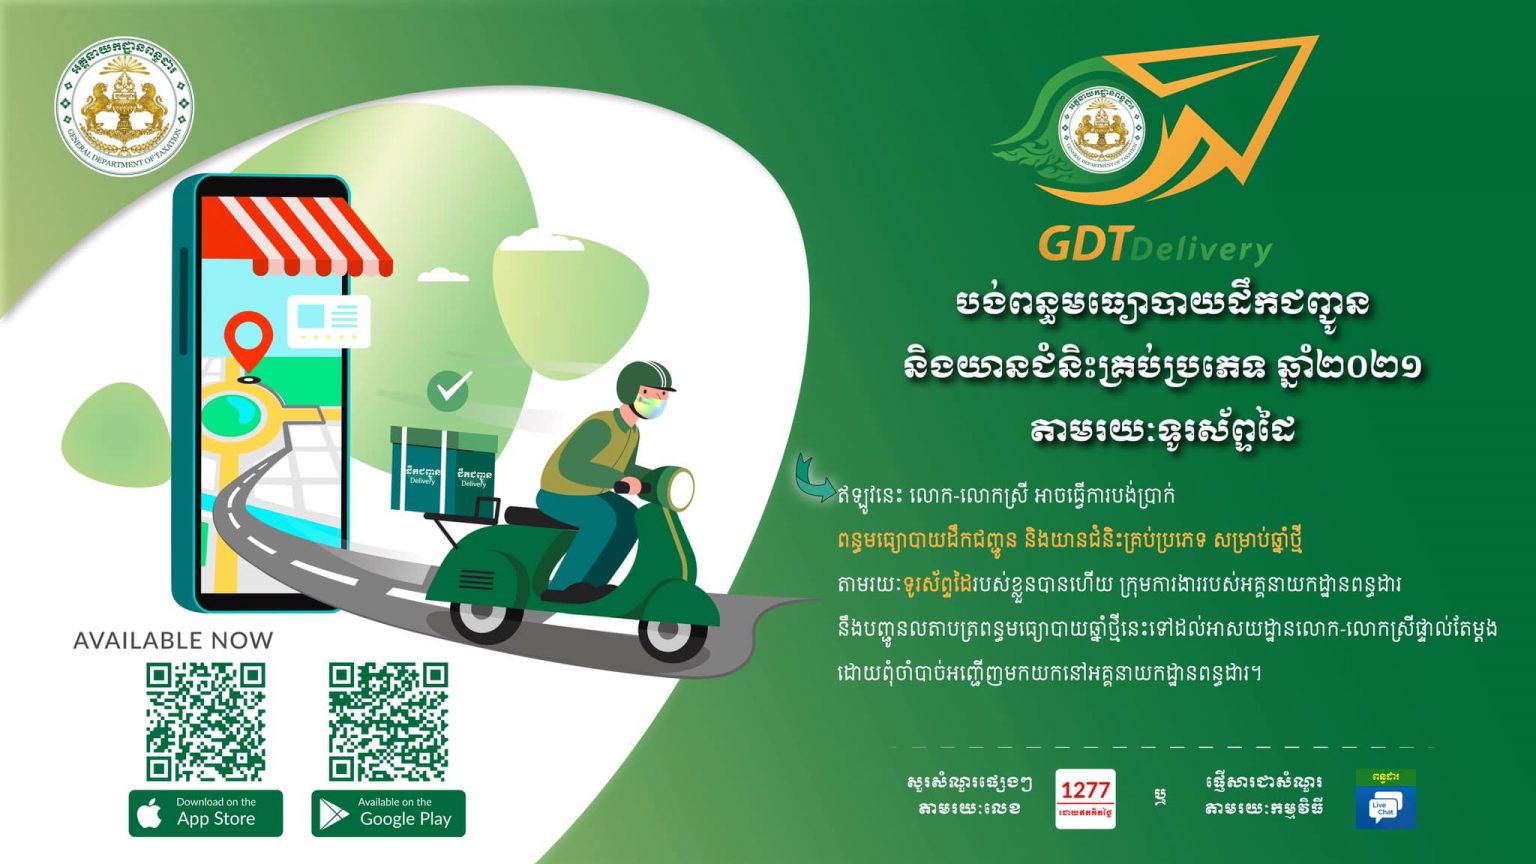 gdt-taxpayer-app-commerce-cambodia